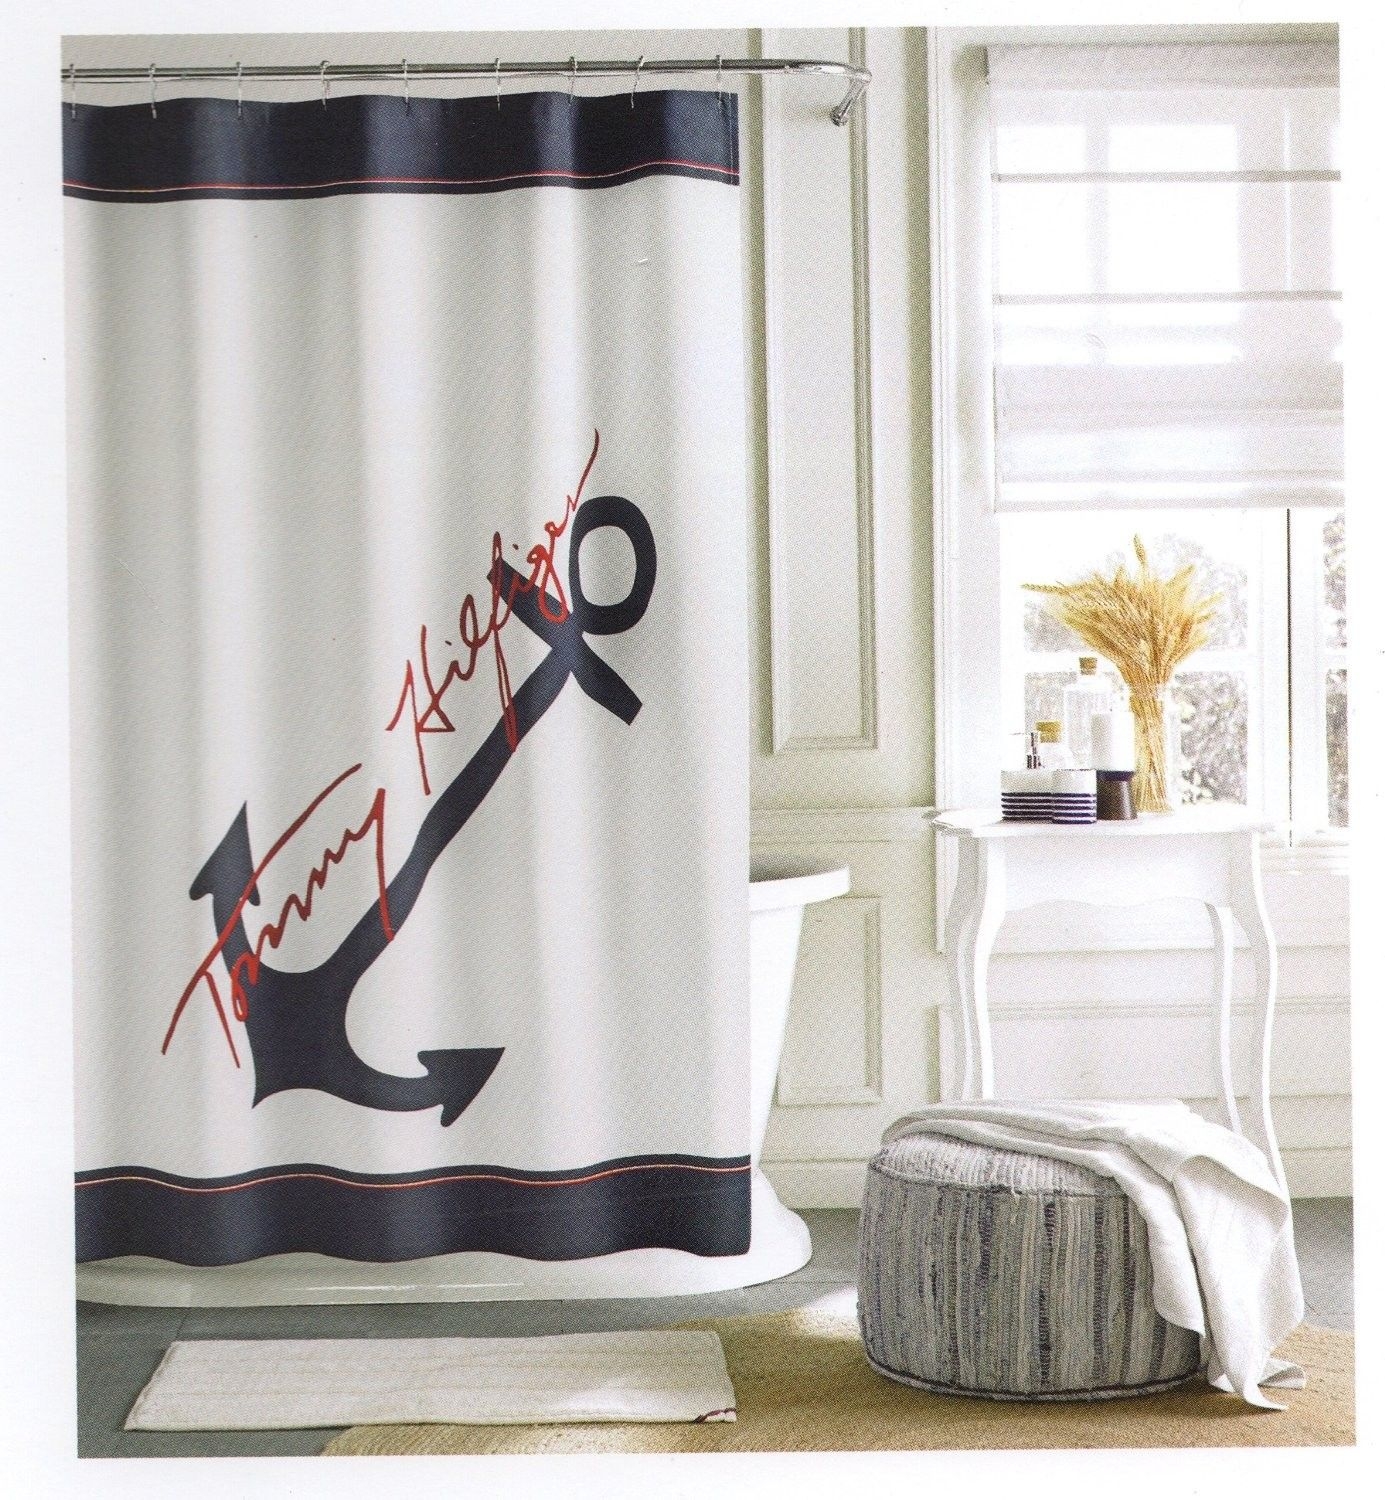 Tommy Hilfiger Cotton Shower Curtain Wide Stripes Fabric Shower Curtain Red Navy Blue Anchor Nautical